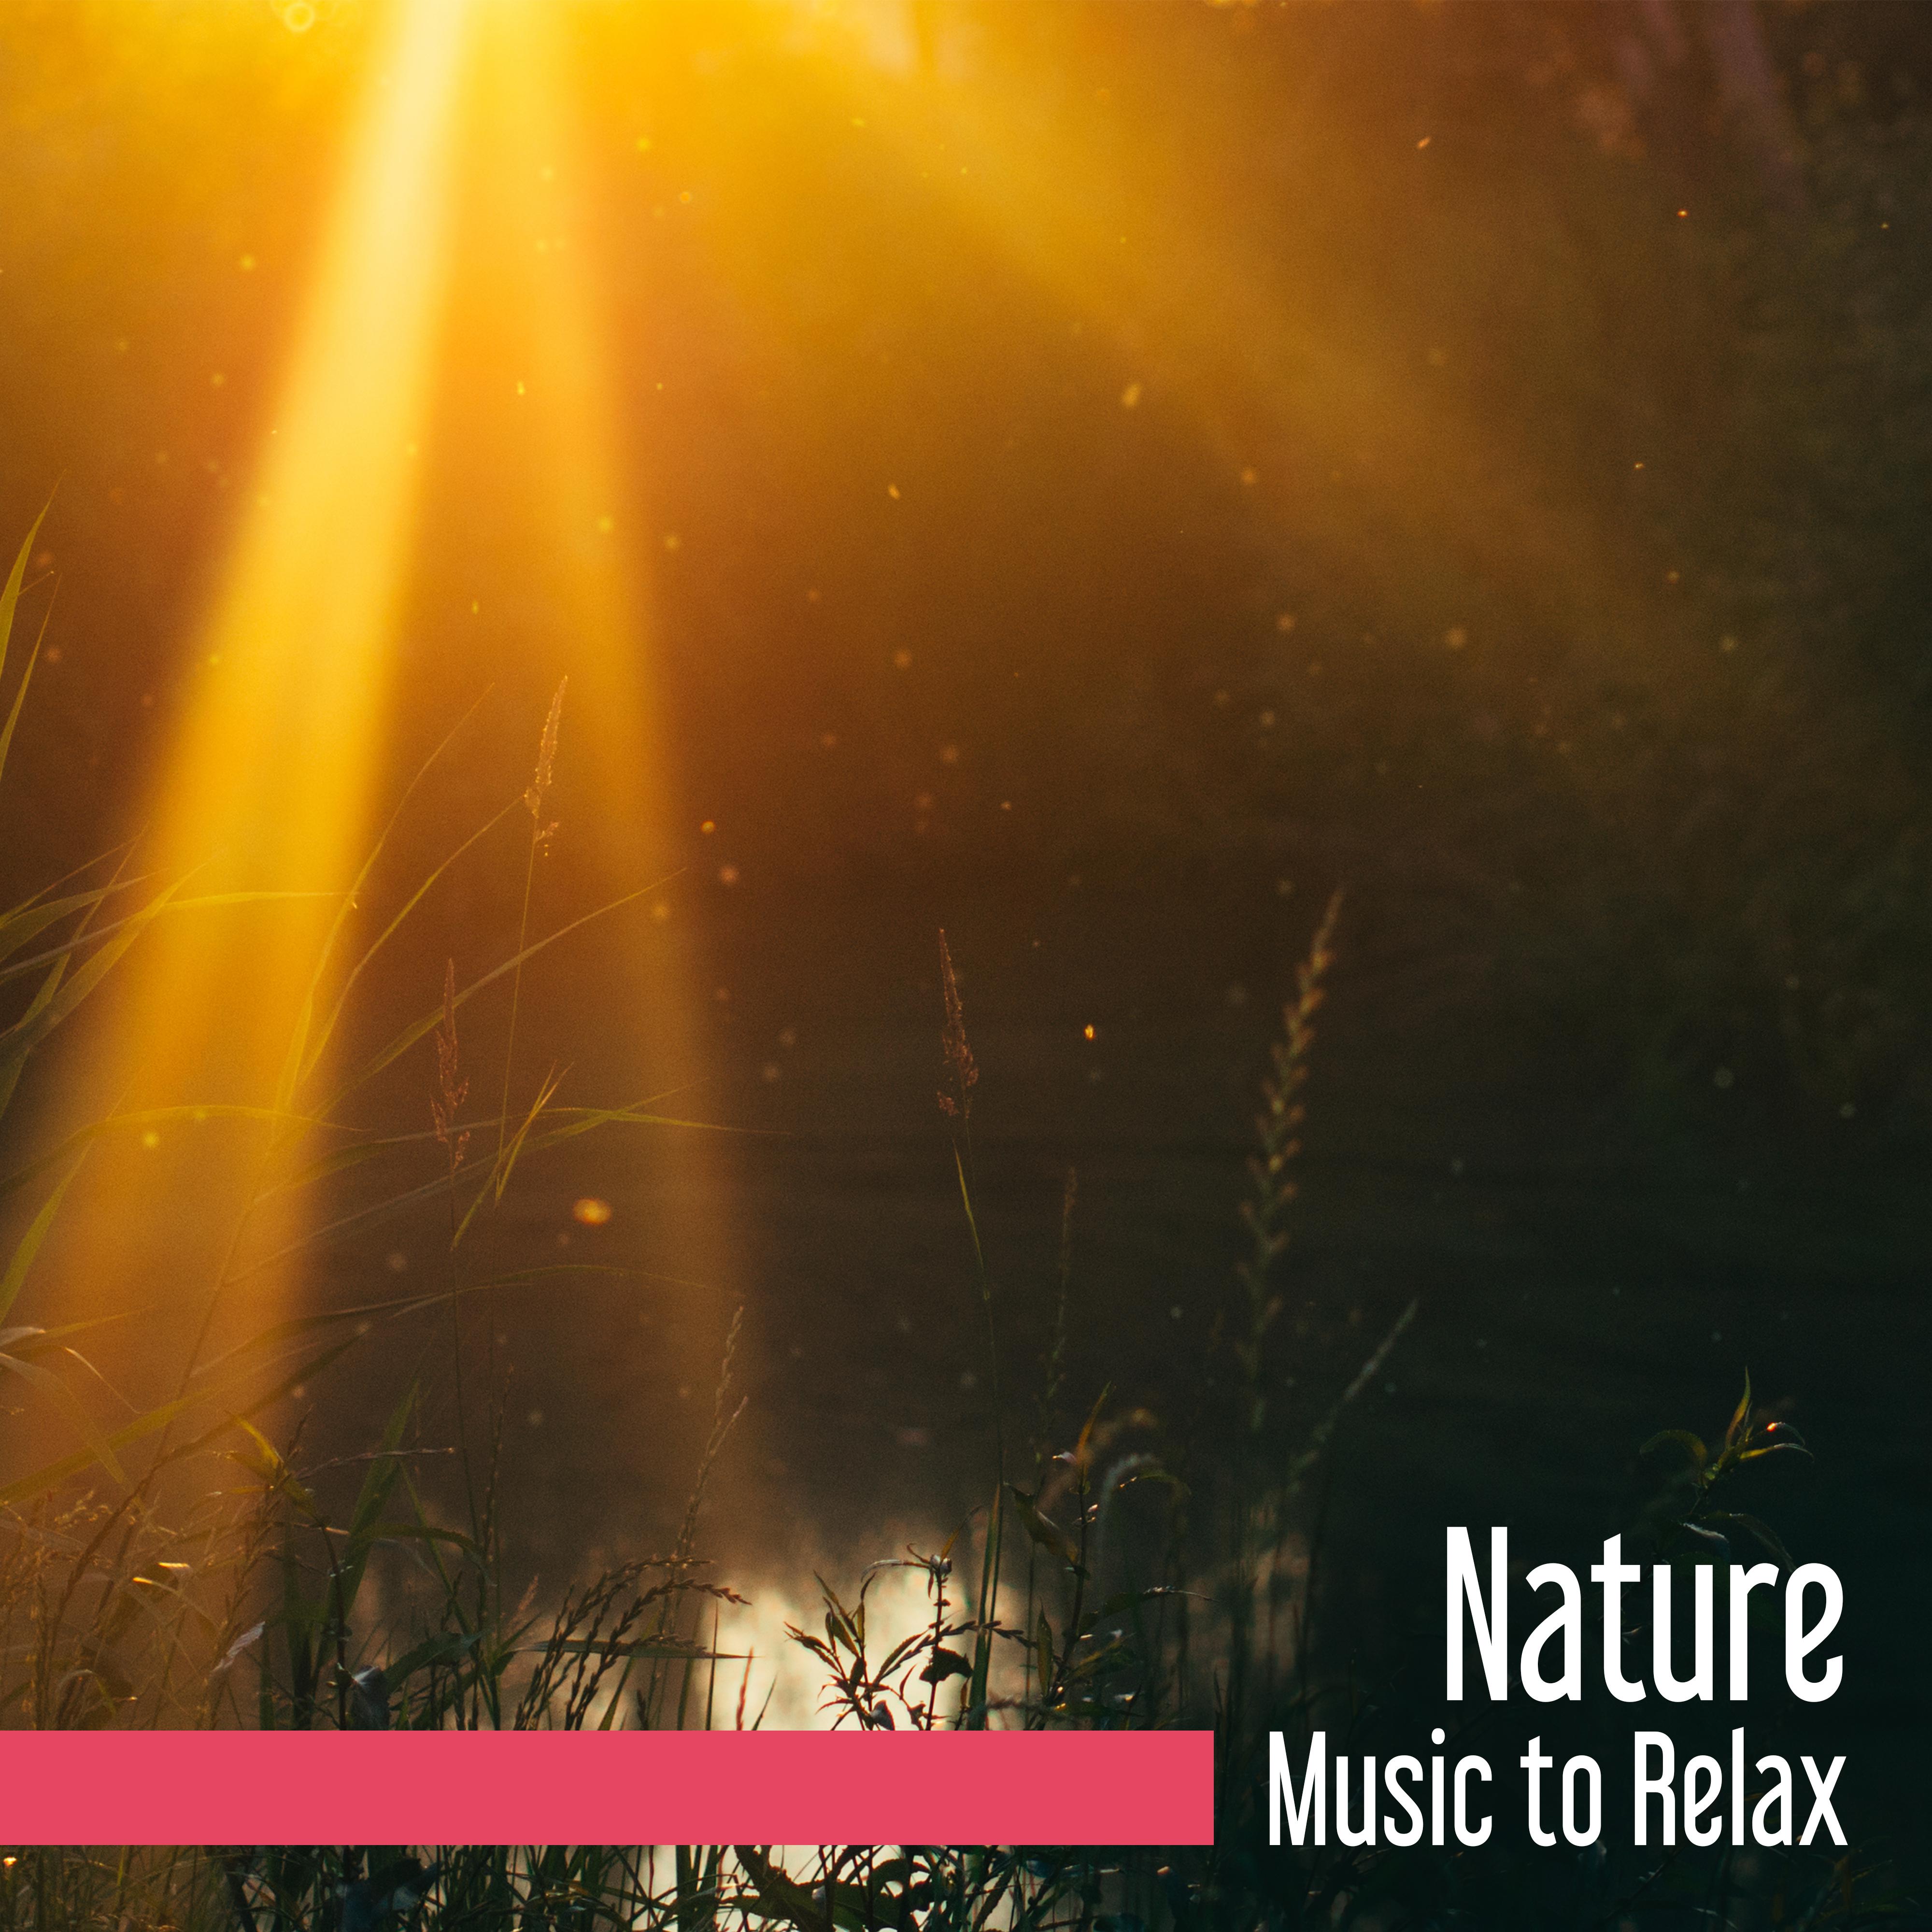 Nature Music to Relax – Easy Listening, Soothing Nature Sounds, Calm Your Mind, Peaceful Songs